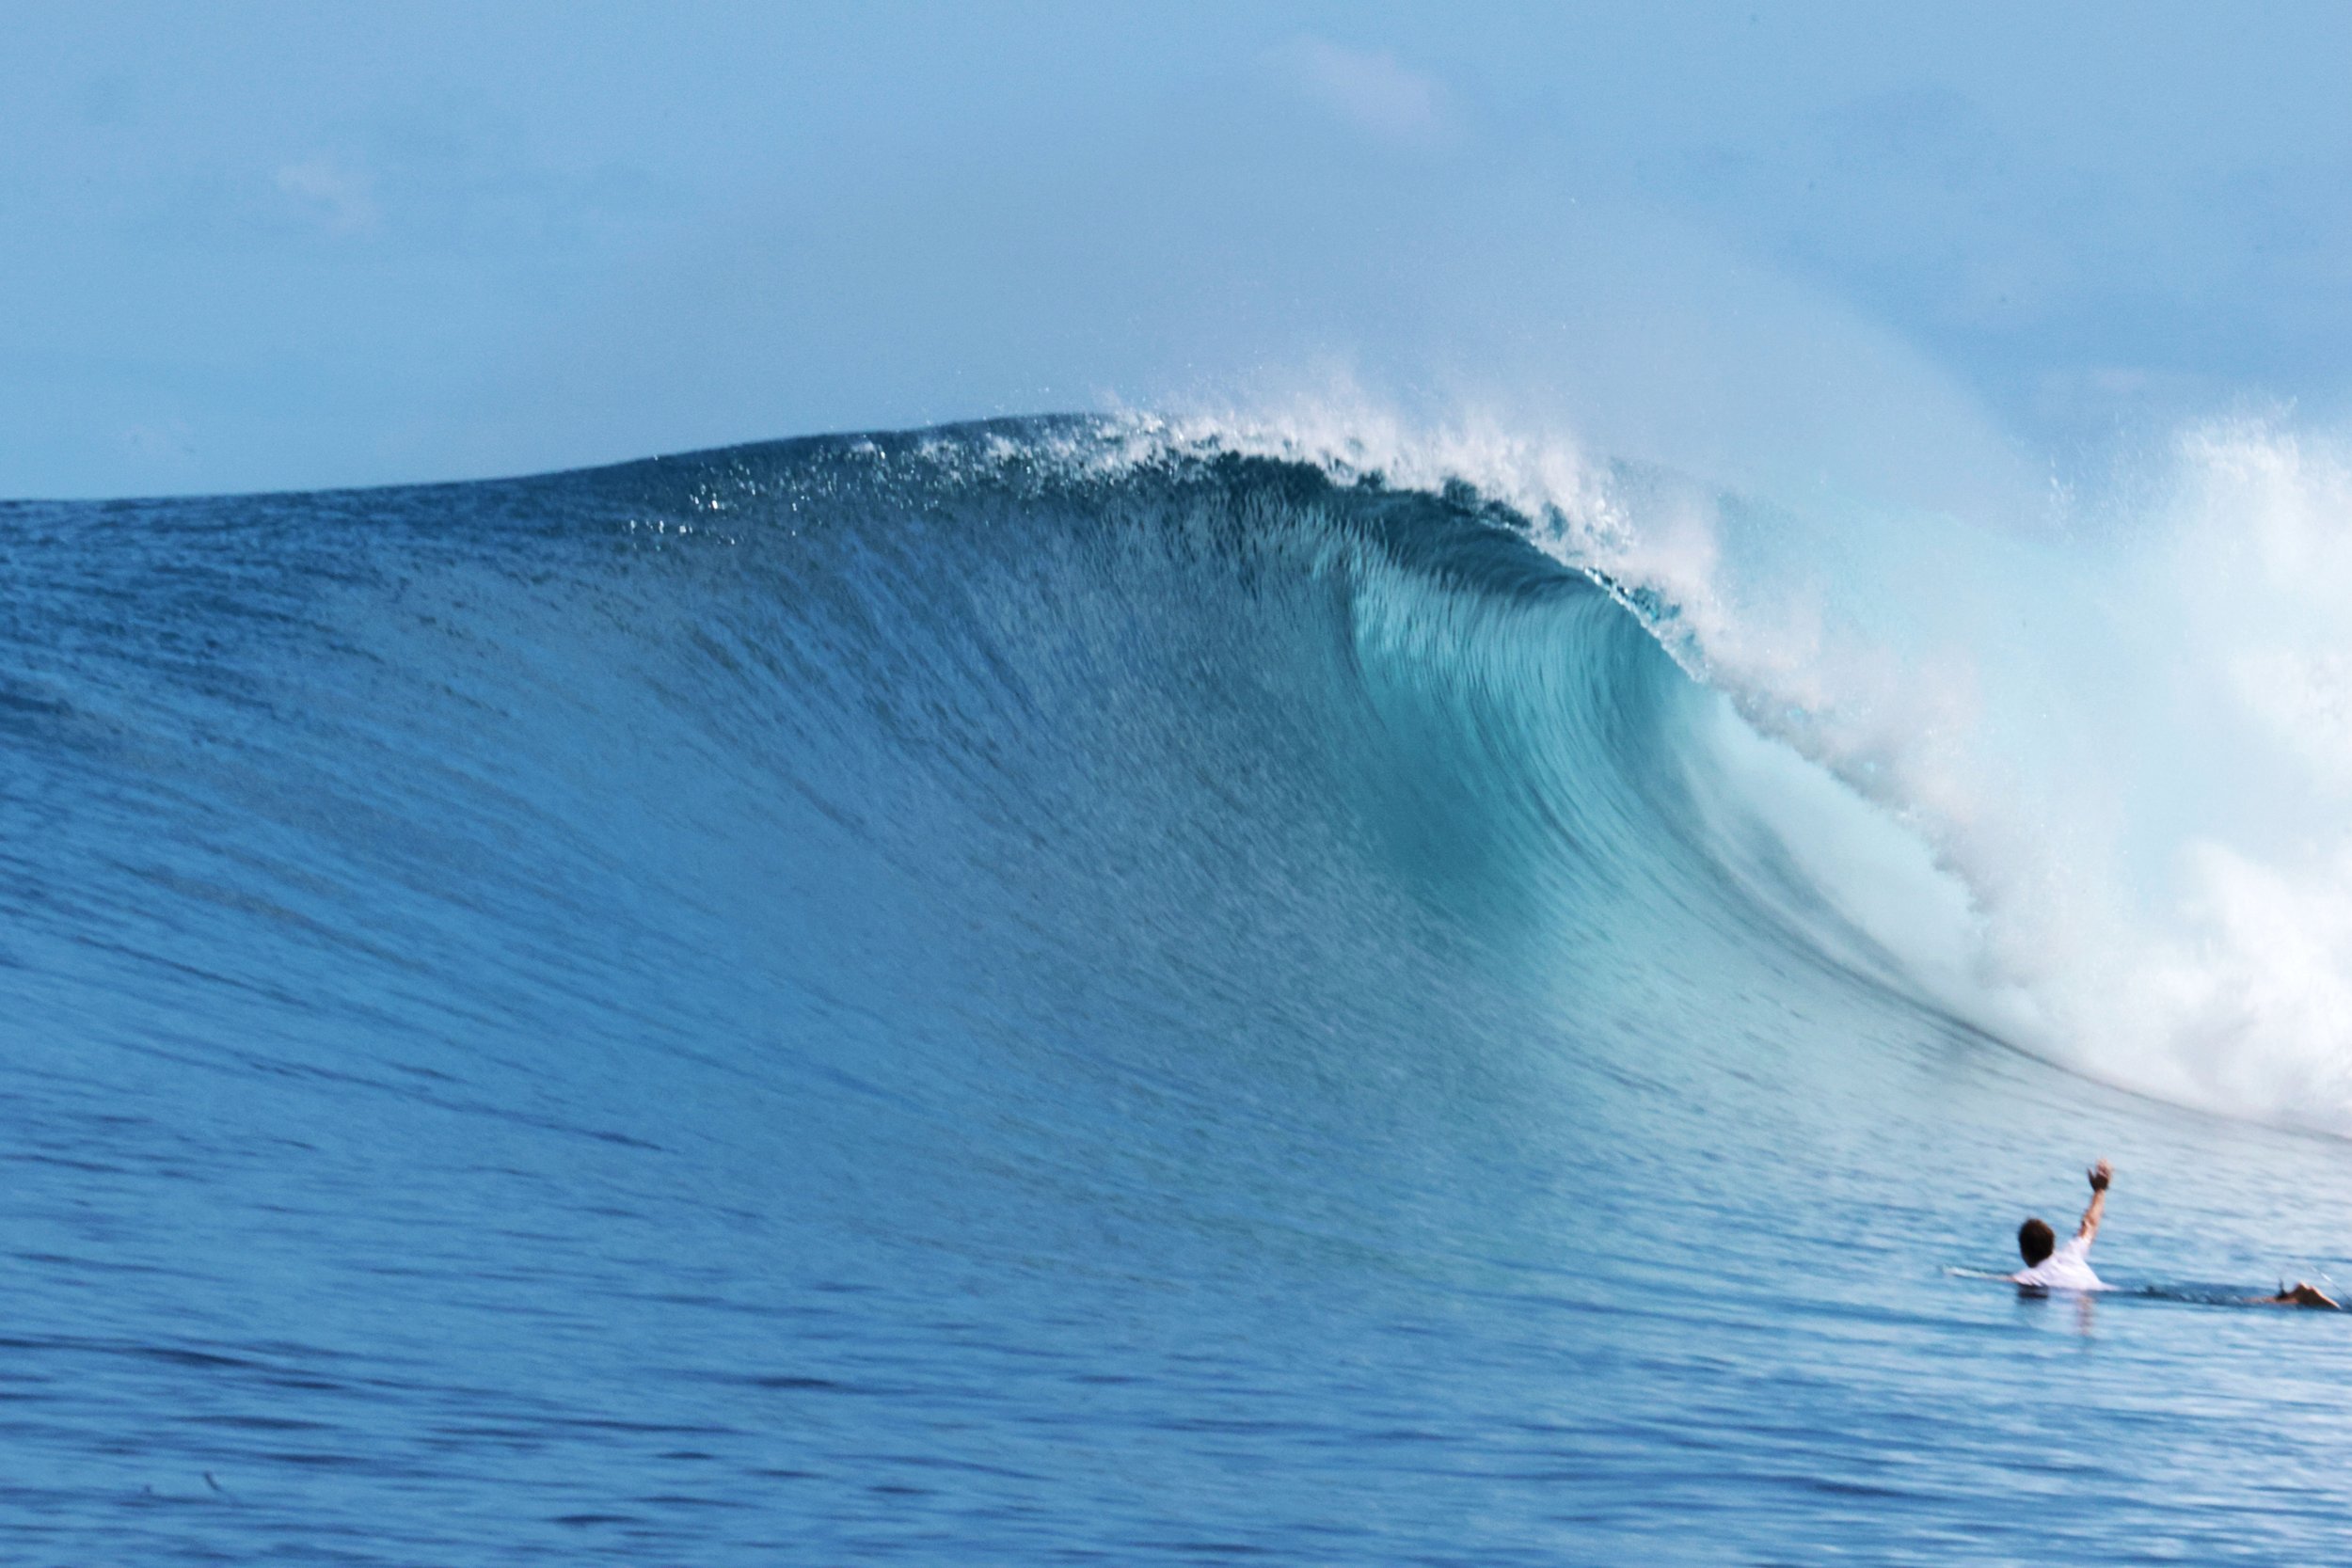 How quick can you paddle out to this?